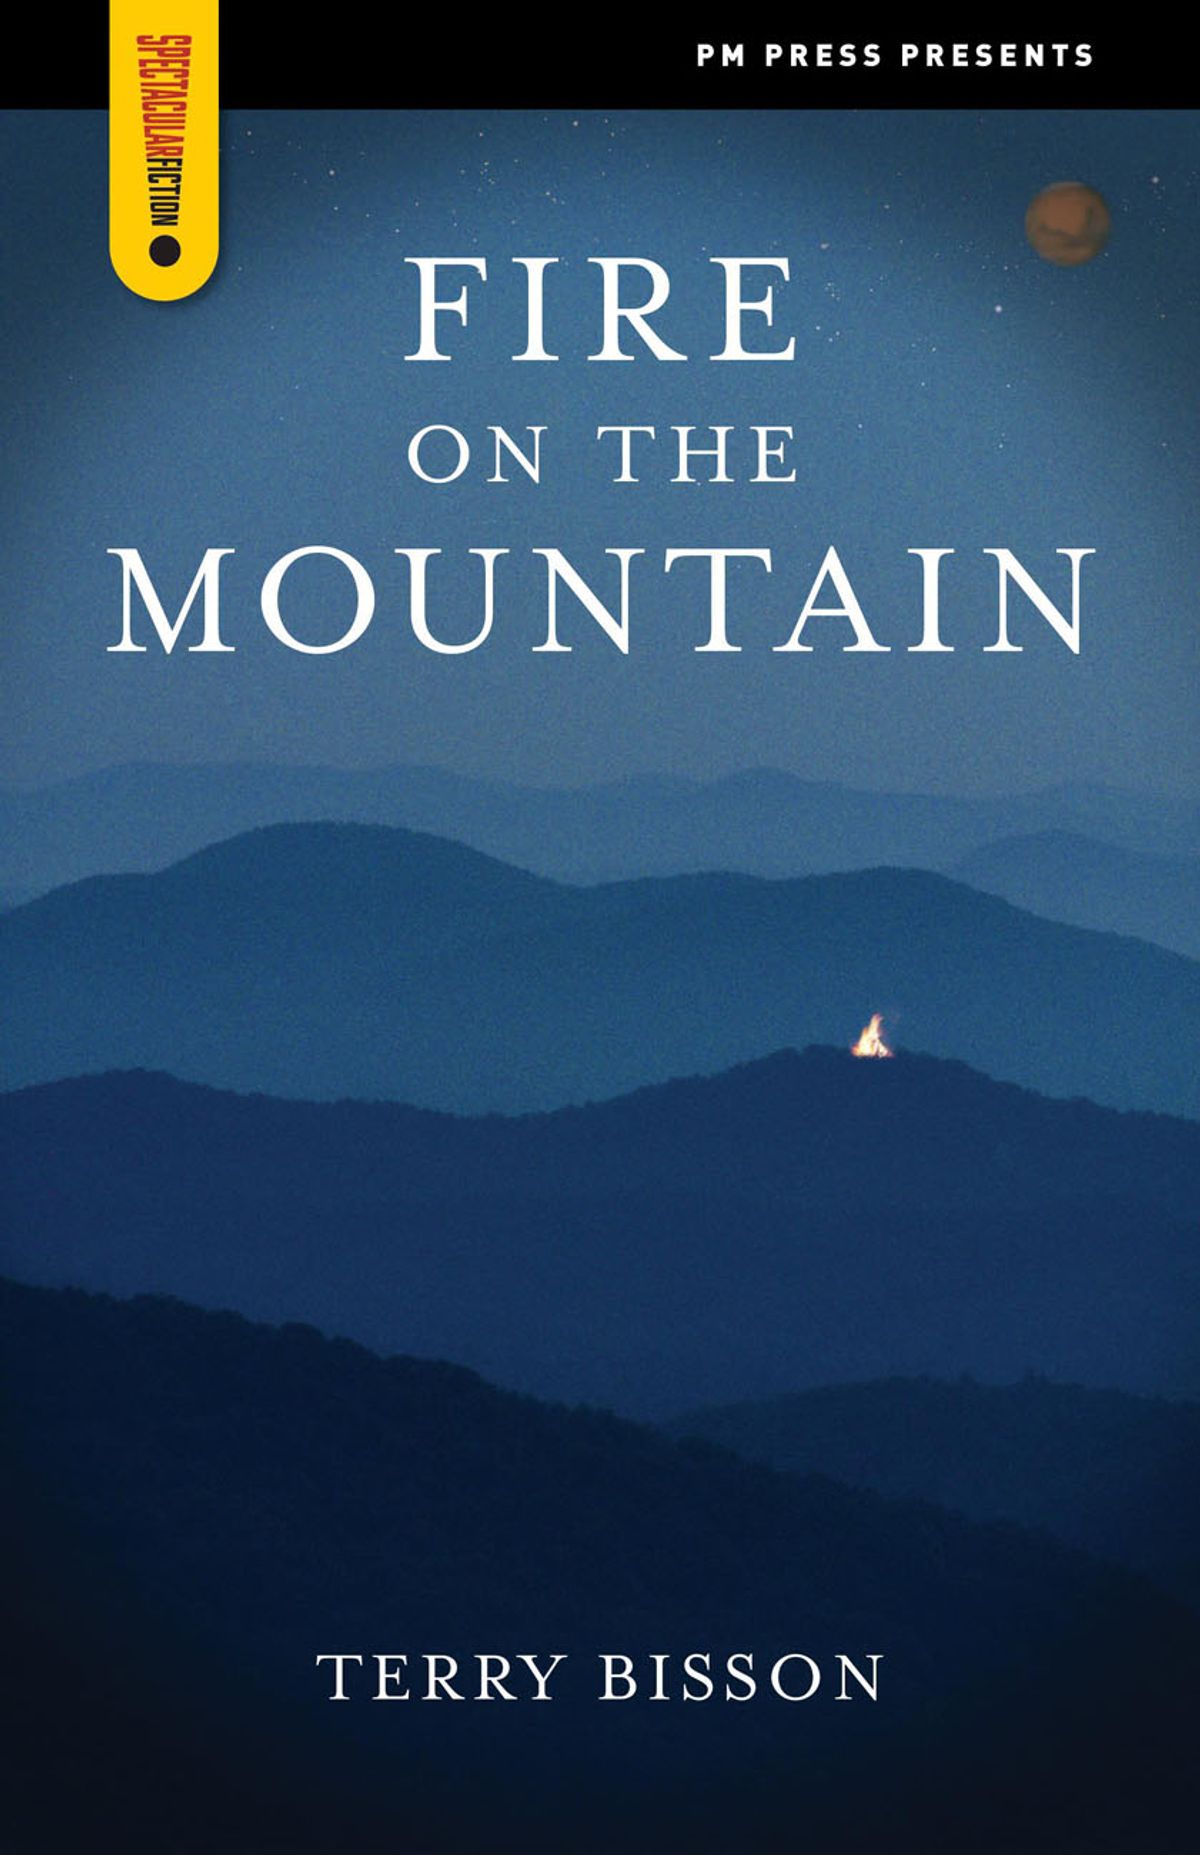 "Fire on the Mountain", de Terry Bisson